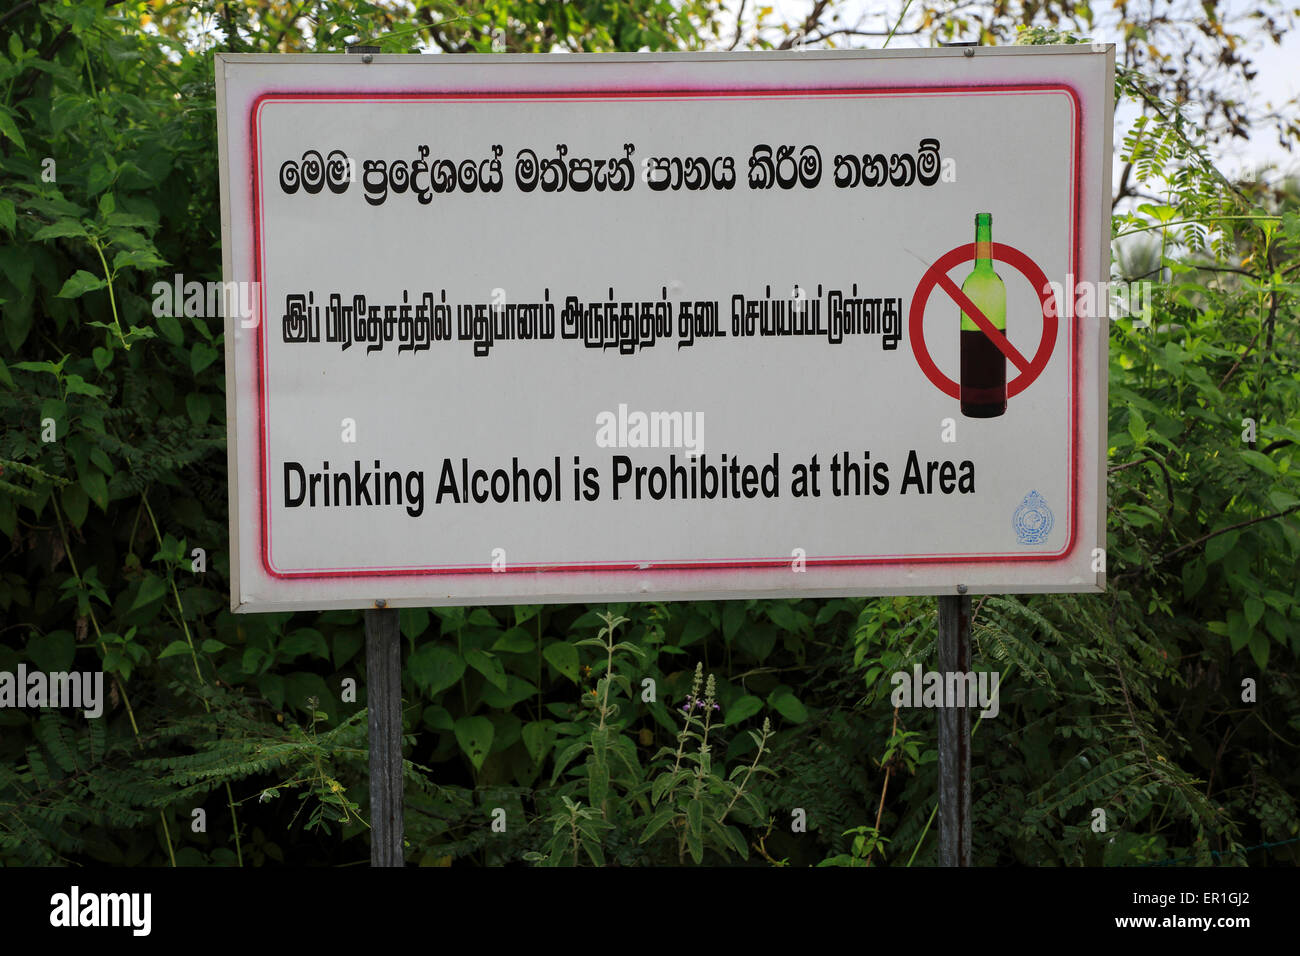 Information sign saying that Drinking Alcohol is Not Permitted, Pasikudah Bay, Eastern Province, Sri Lanka, Asia Stock Photo